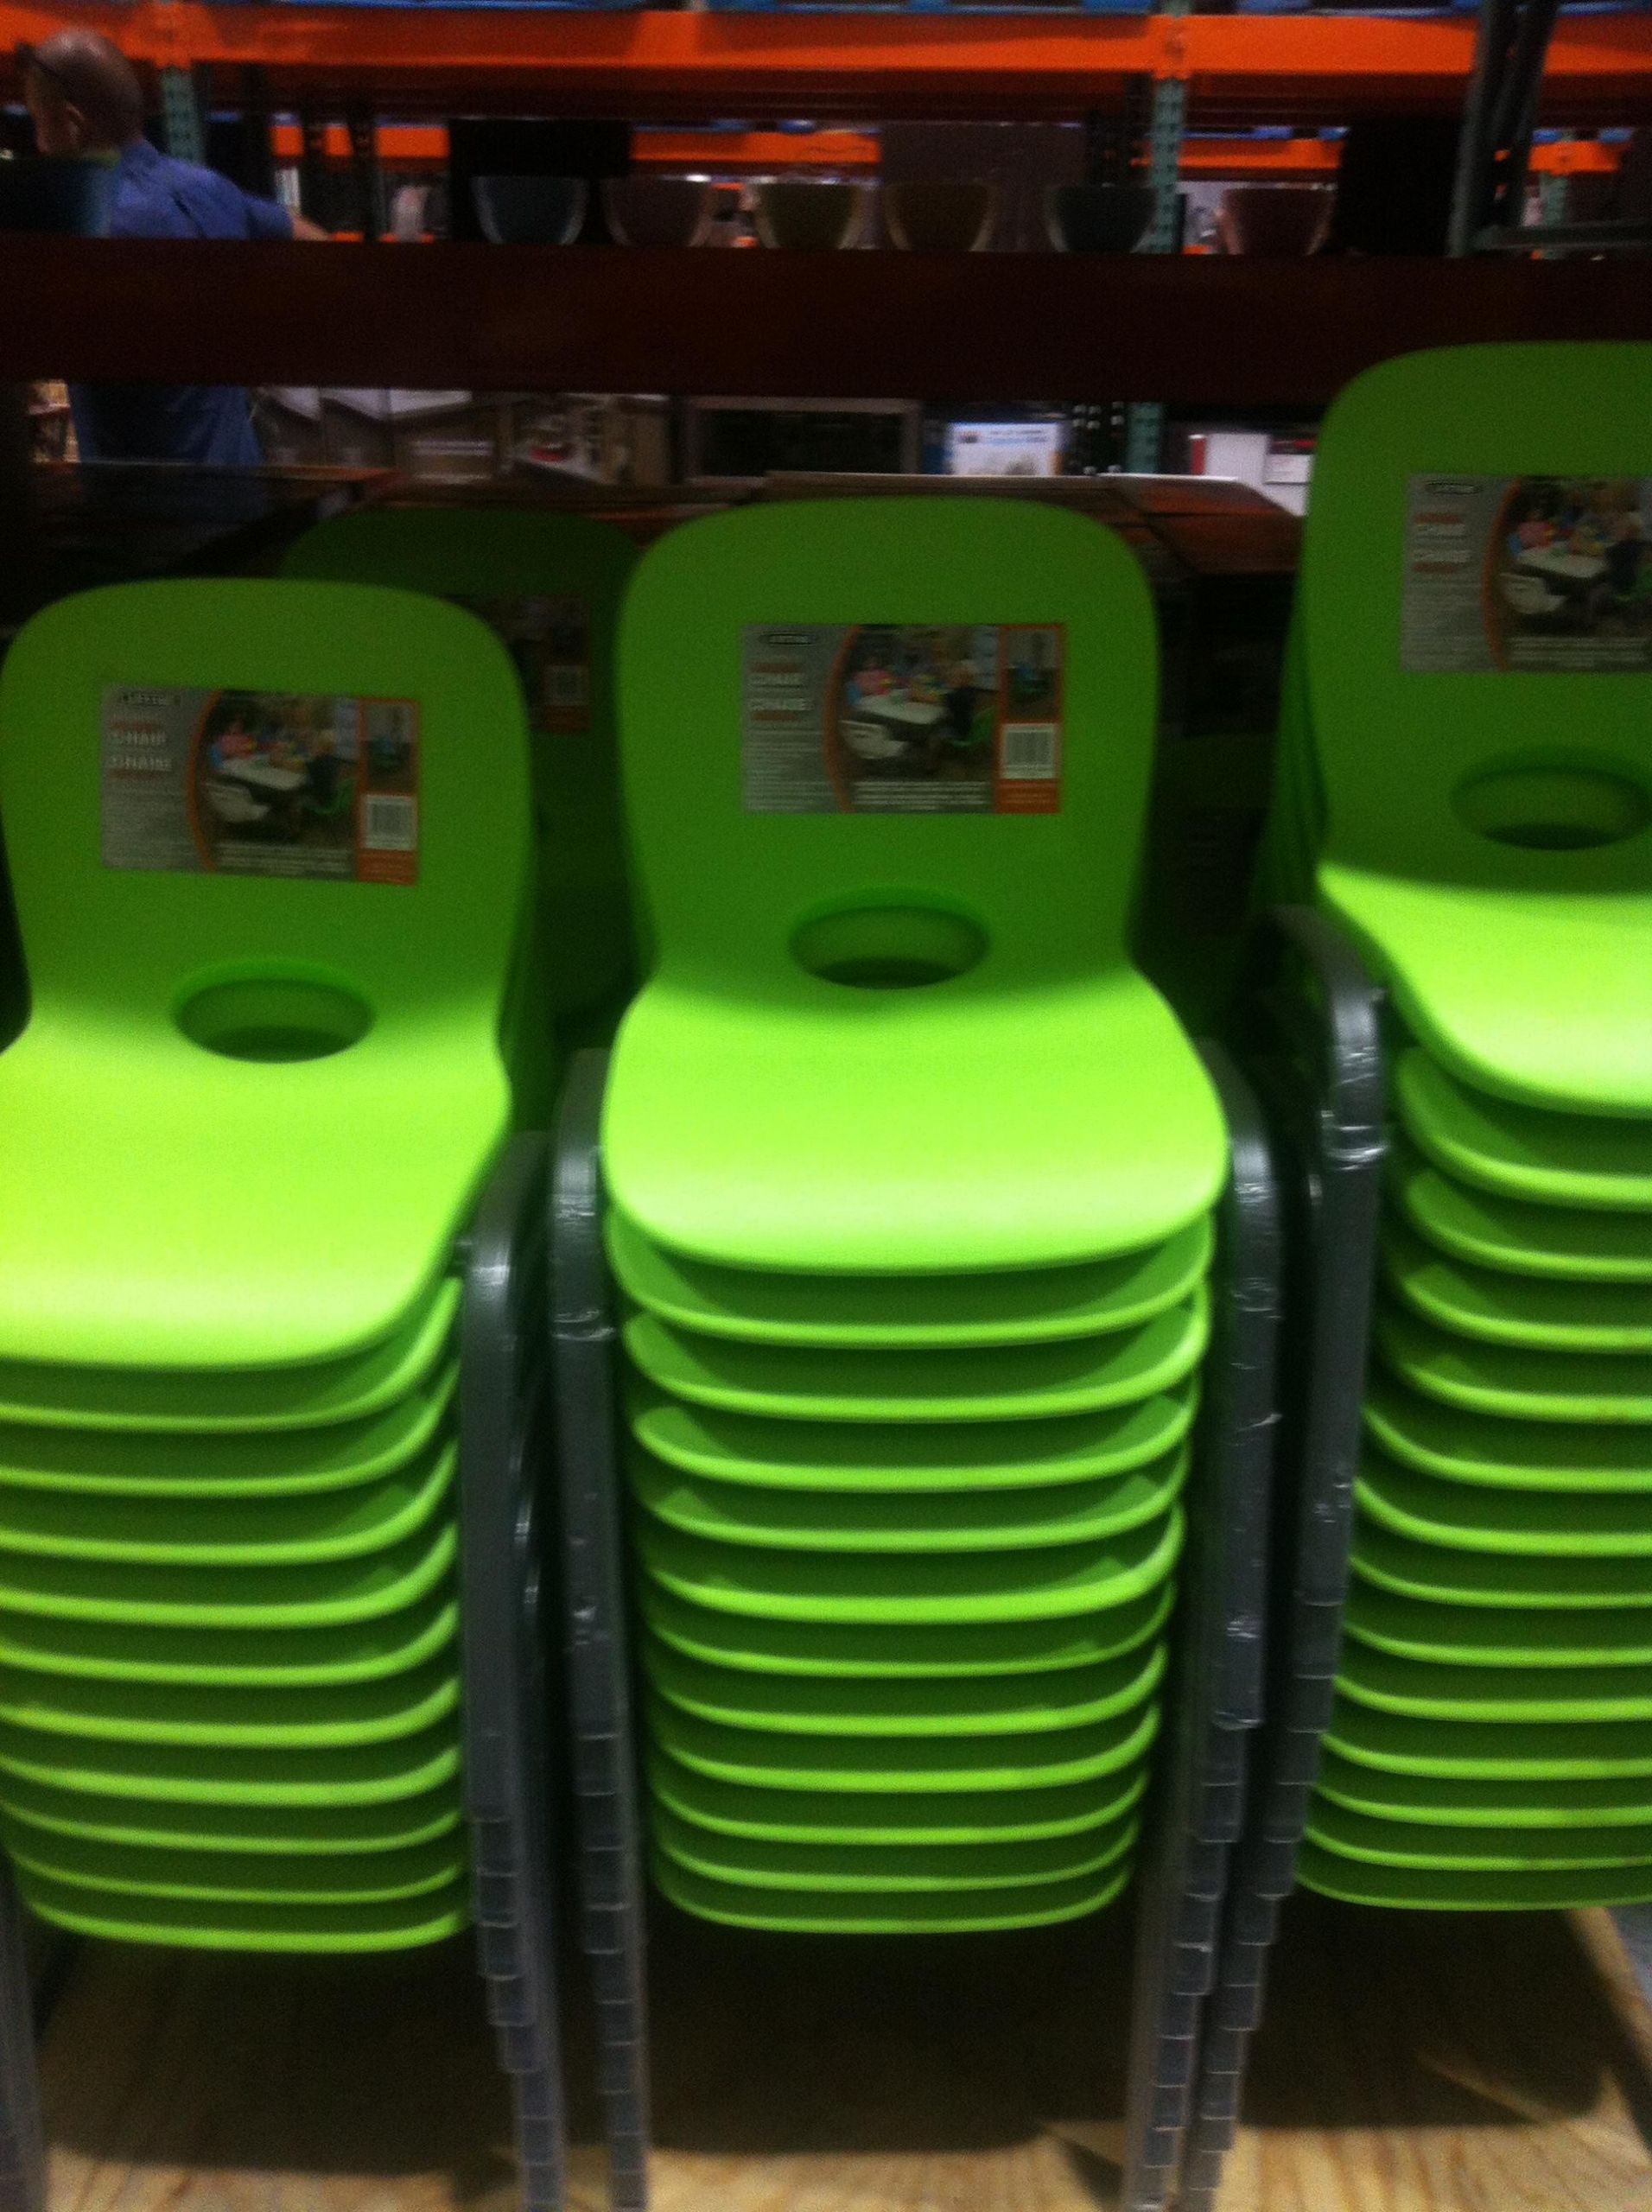 Costco Kids Chair
 [Costco] Lifetime Children’s Stacking Chair $9 97